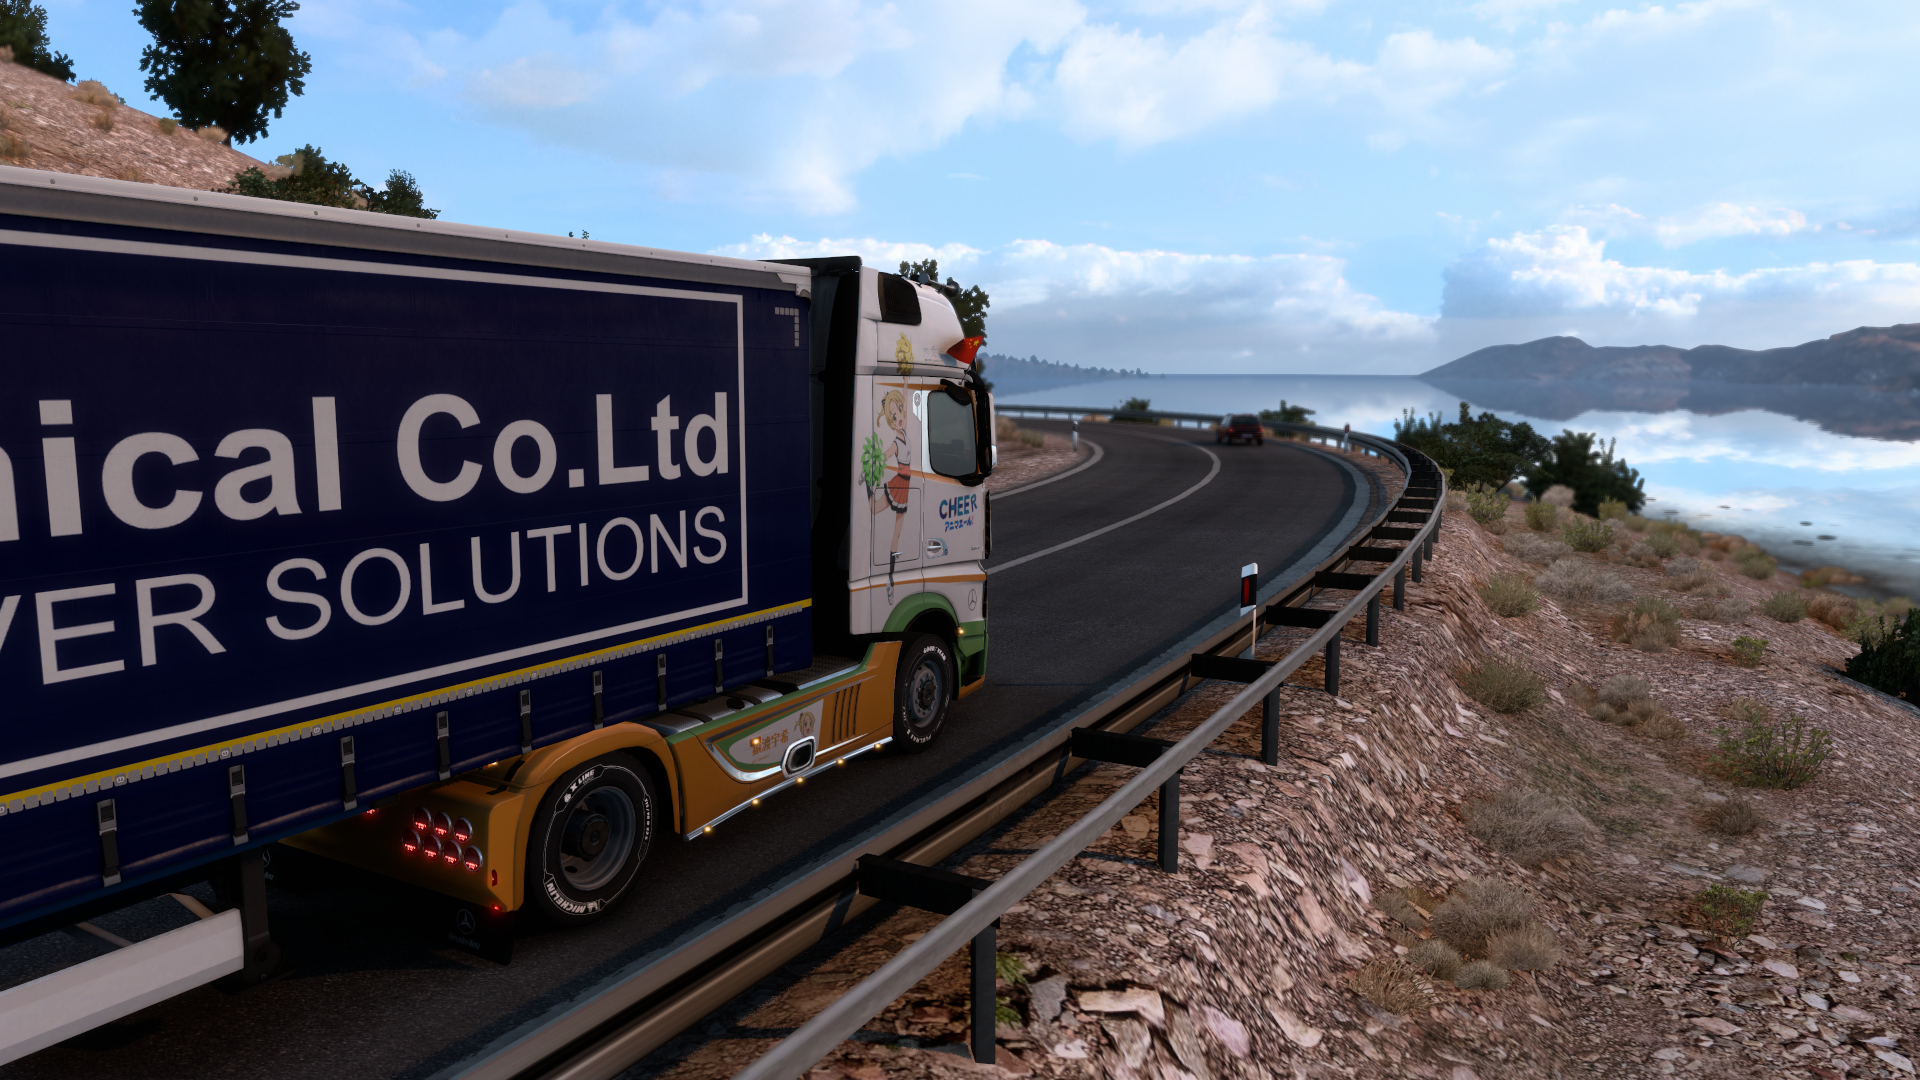 ets2_20210416_164329_00.png